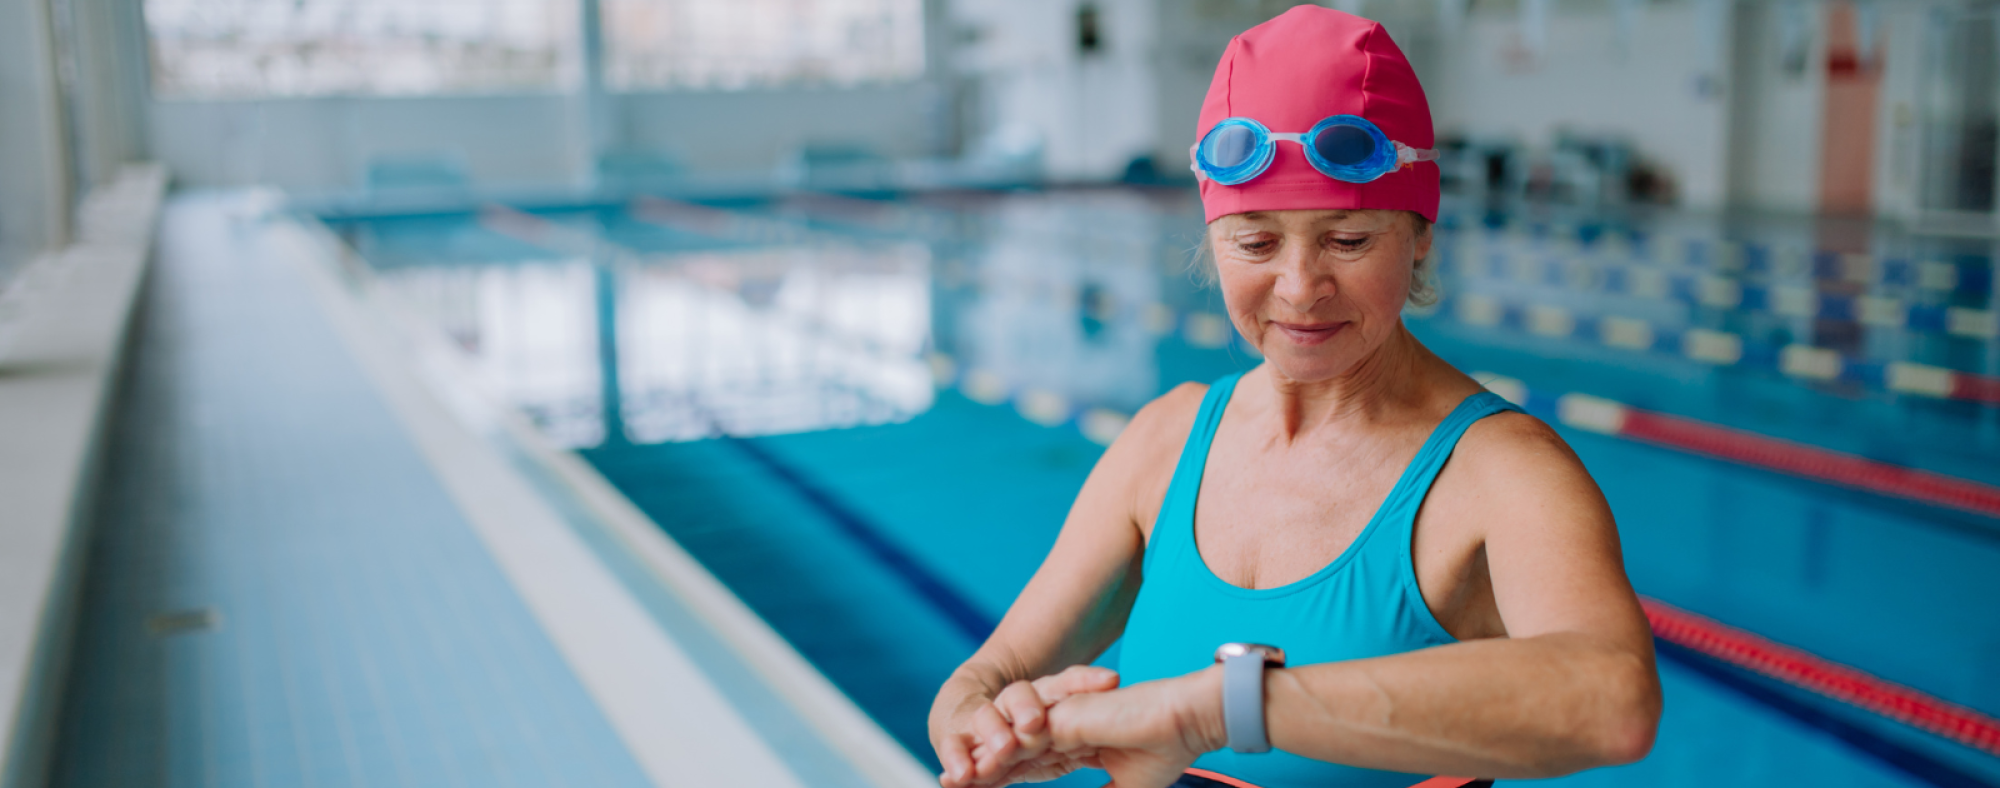 Swimmer checking time with wristwatch beside a swimming pool.